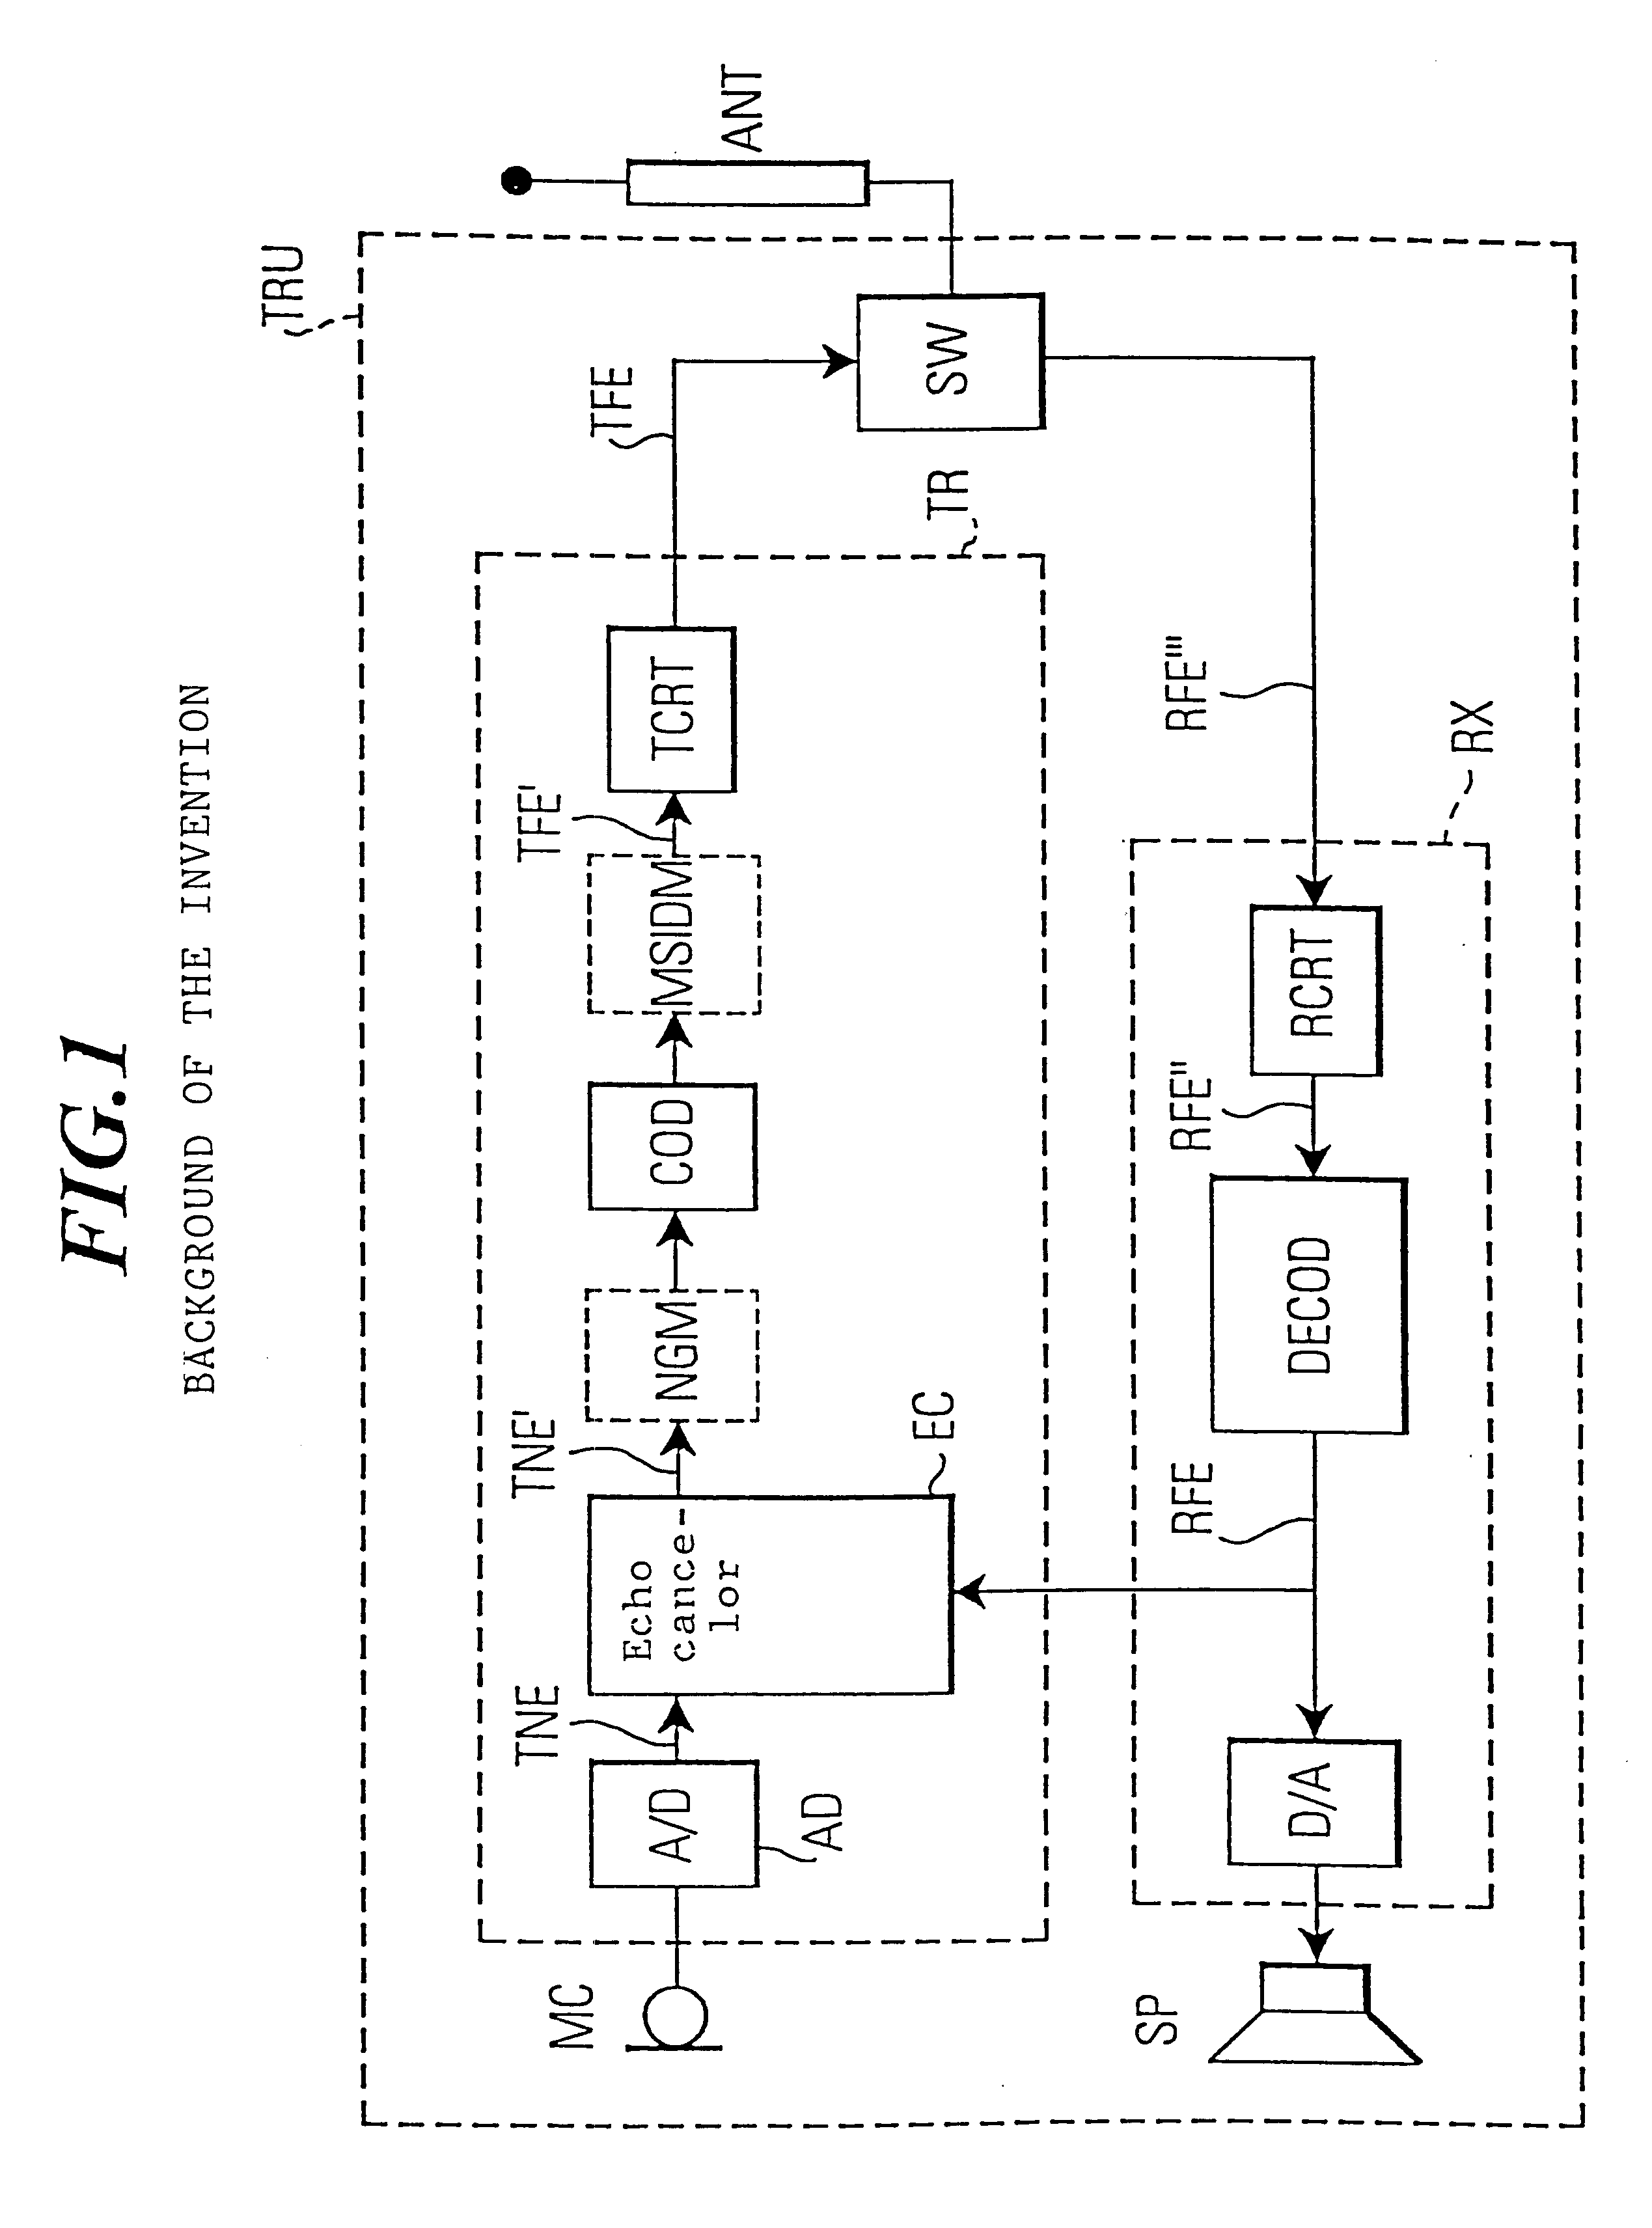 Echo cancellation device for cancelling echos in a transceiver unit